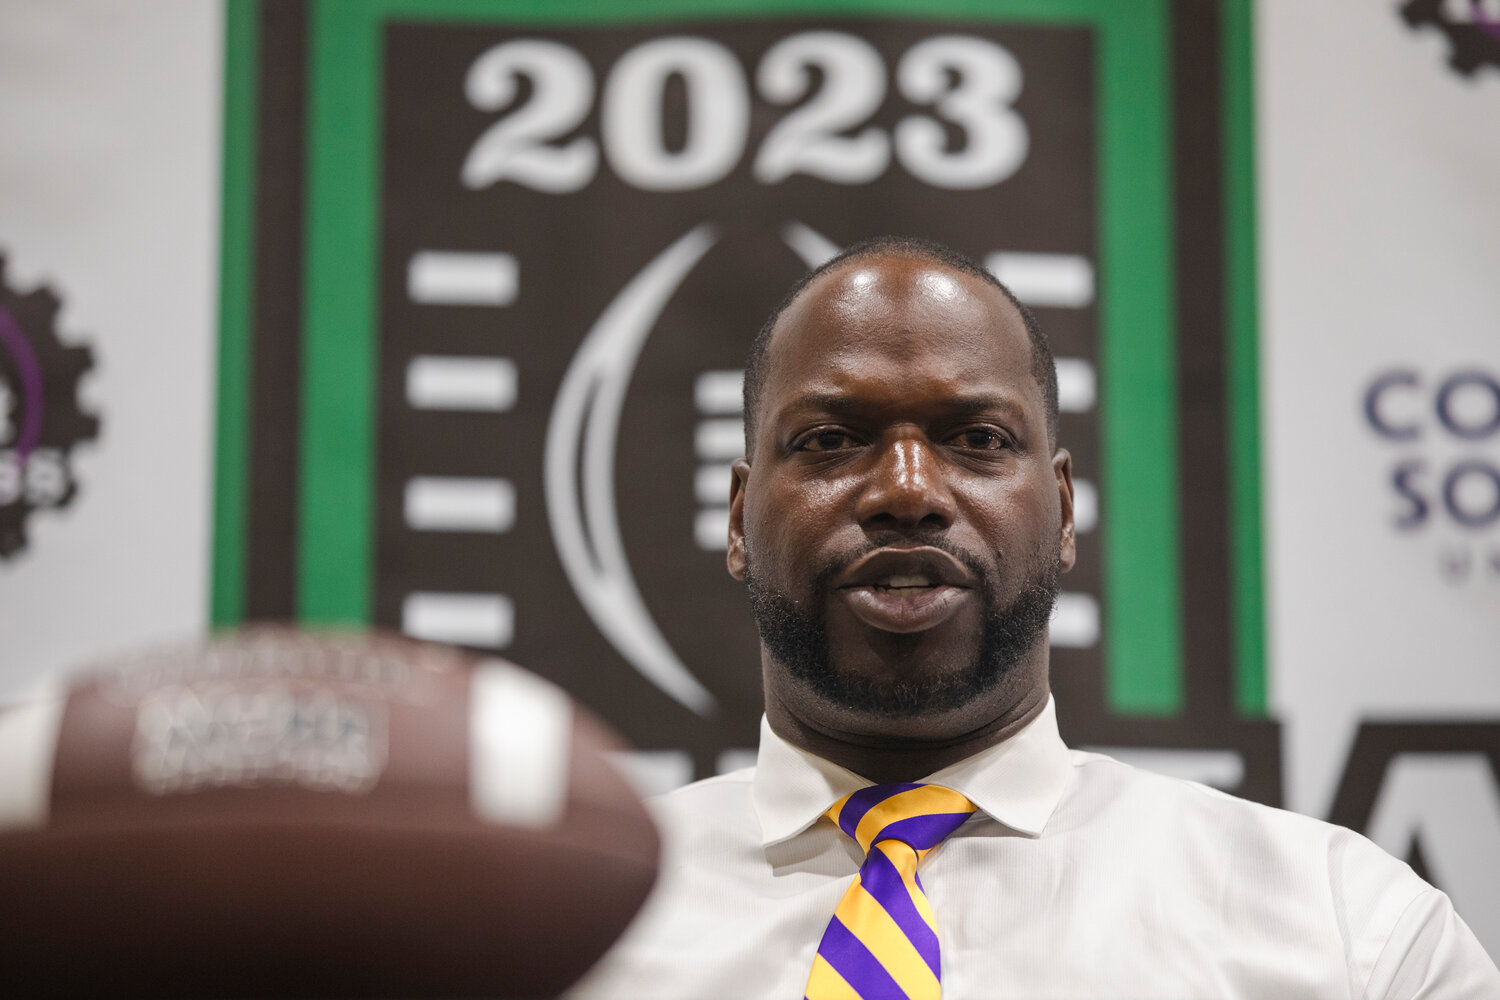 Kenny King, a Daphne alum entering his eighth year at the helm of the Trojan football program, met with the press at the second-annual Gulf Coast Media Day on July 27 at the Orange Beach Event Center. King, who played collegiately at Alabama and professionally in Arizona, said this year’s defensive line group is shaping up to be one of the team’s strengths.